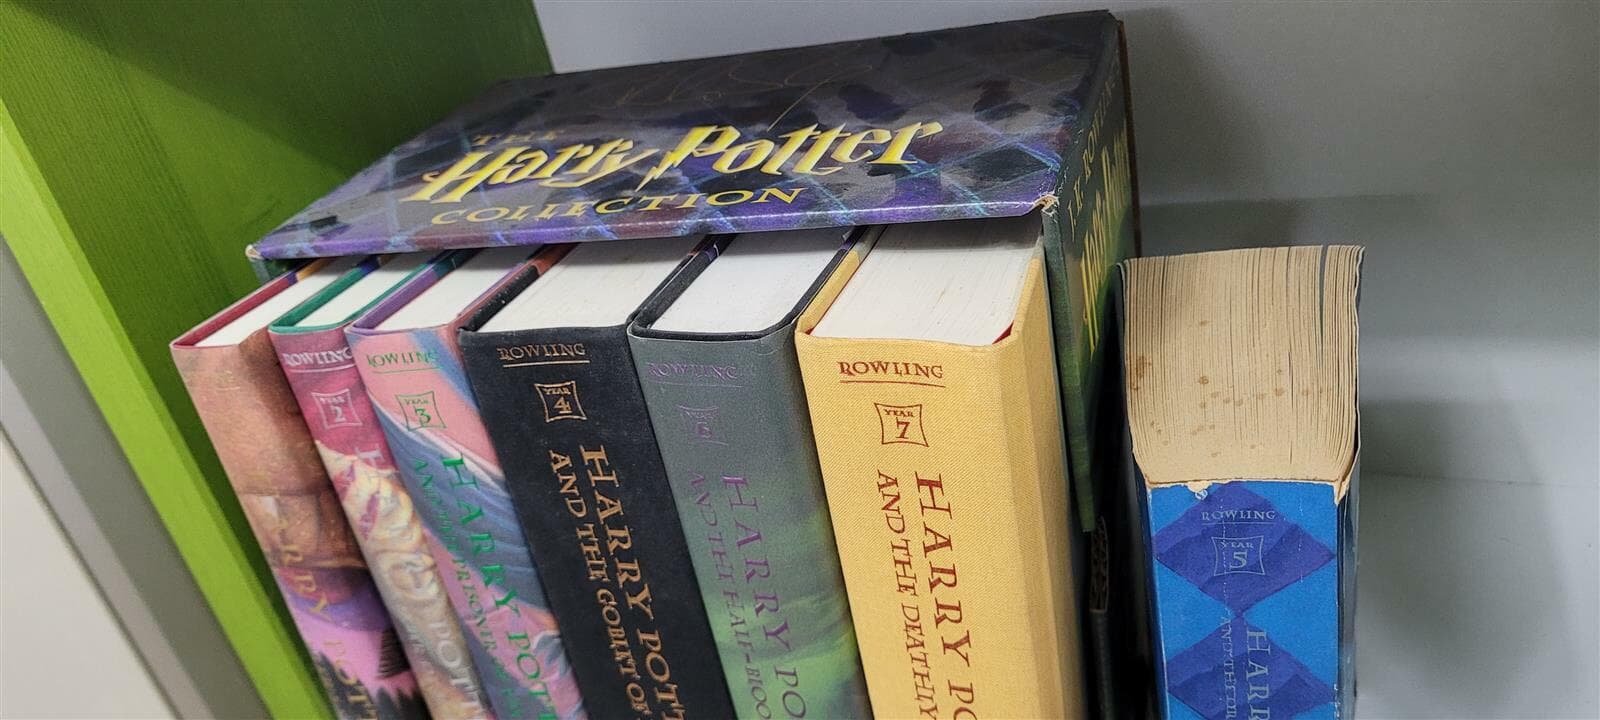 The Harry Potter Collection(양장본/상세설명참조)